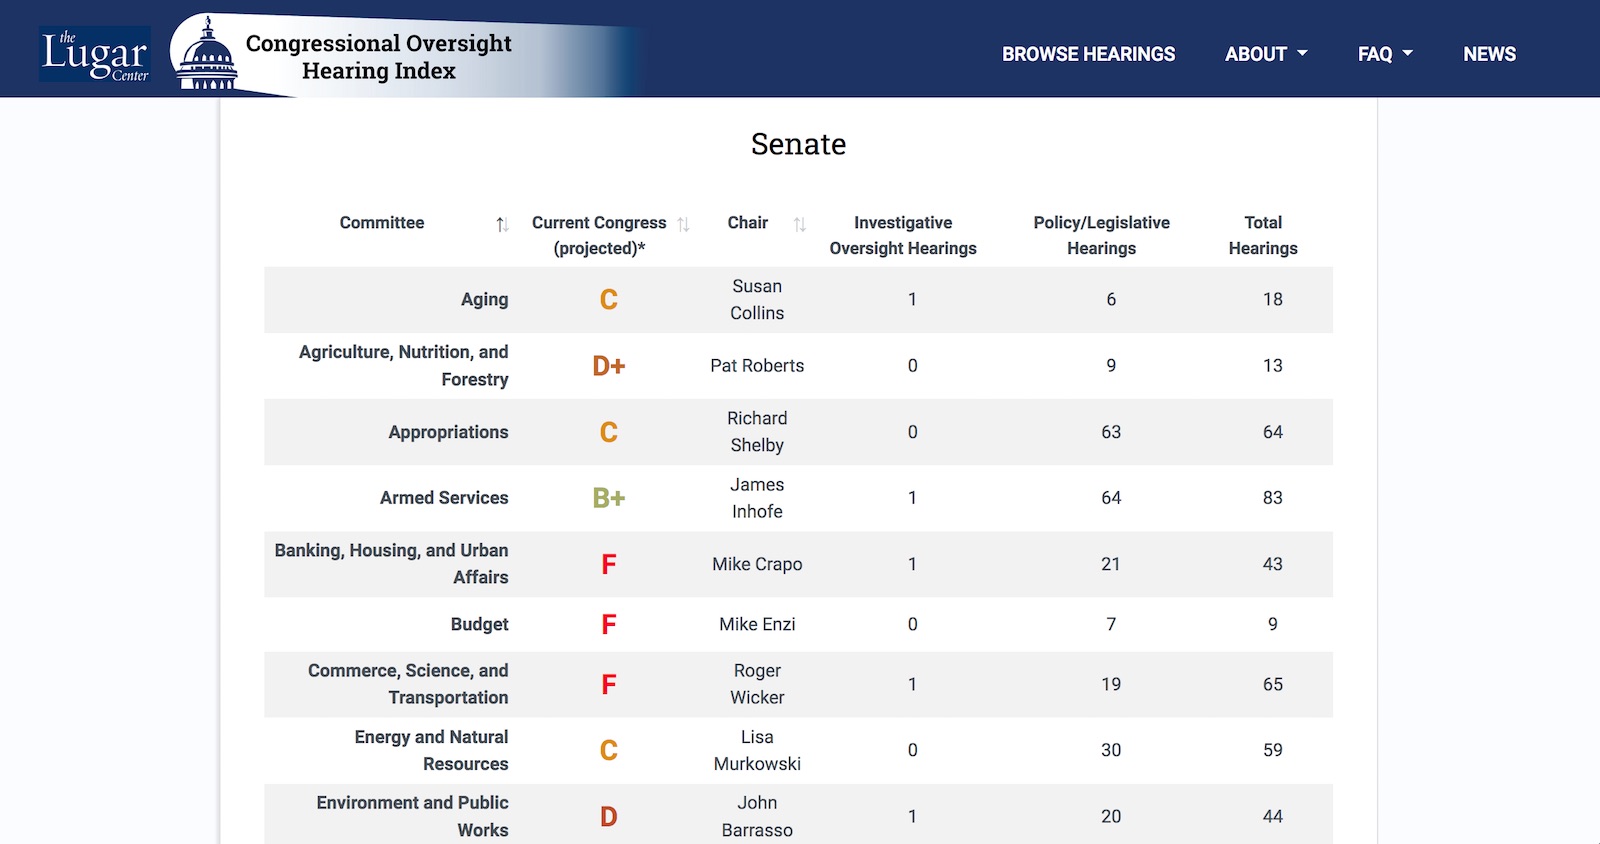 The Lugar Center Congressional Oversight Hearing Index